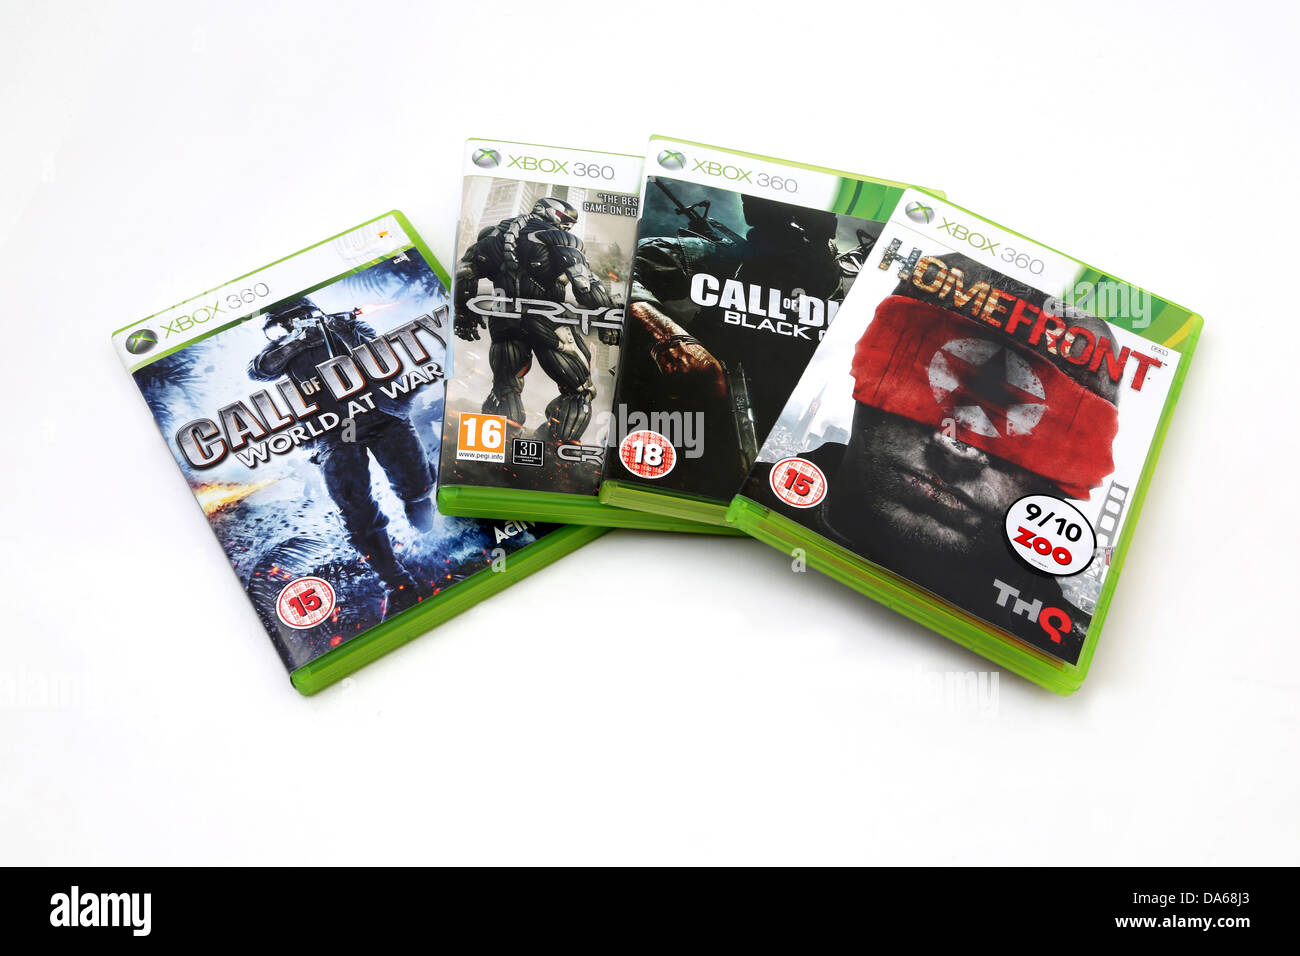 4 XBOX 360 Games Call Of Duty World At War, Crysis 2, Call Of Duty Black Ops And Homefront Stock Photo